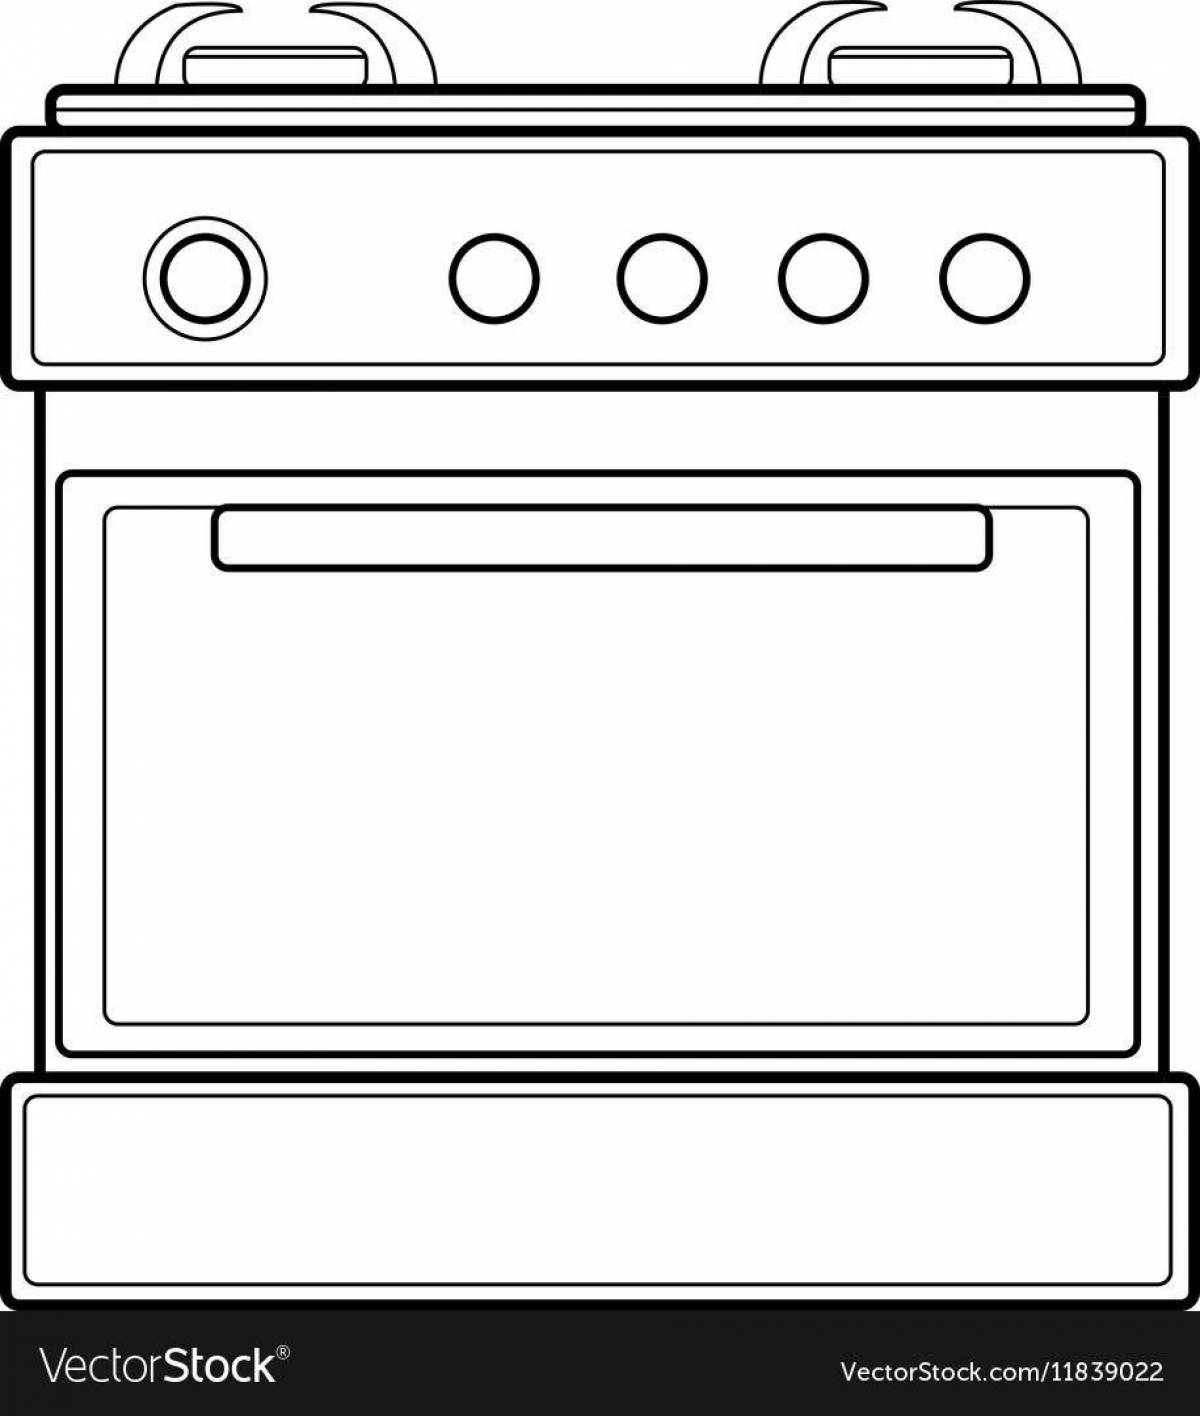 Fun oven coloring page